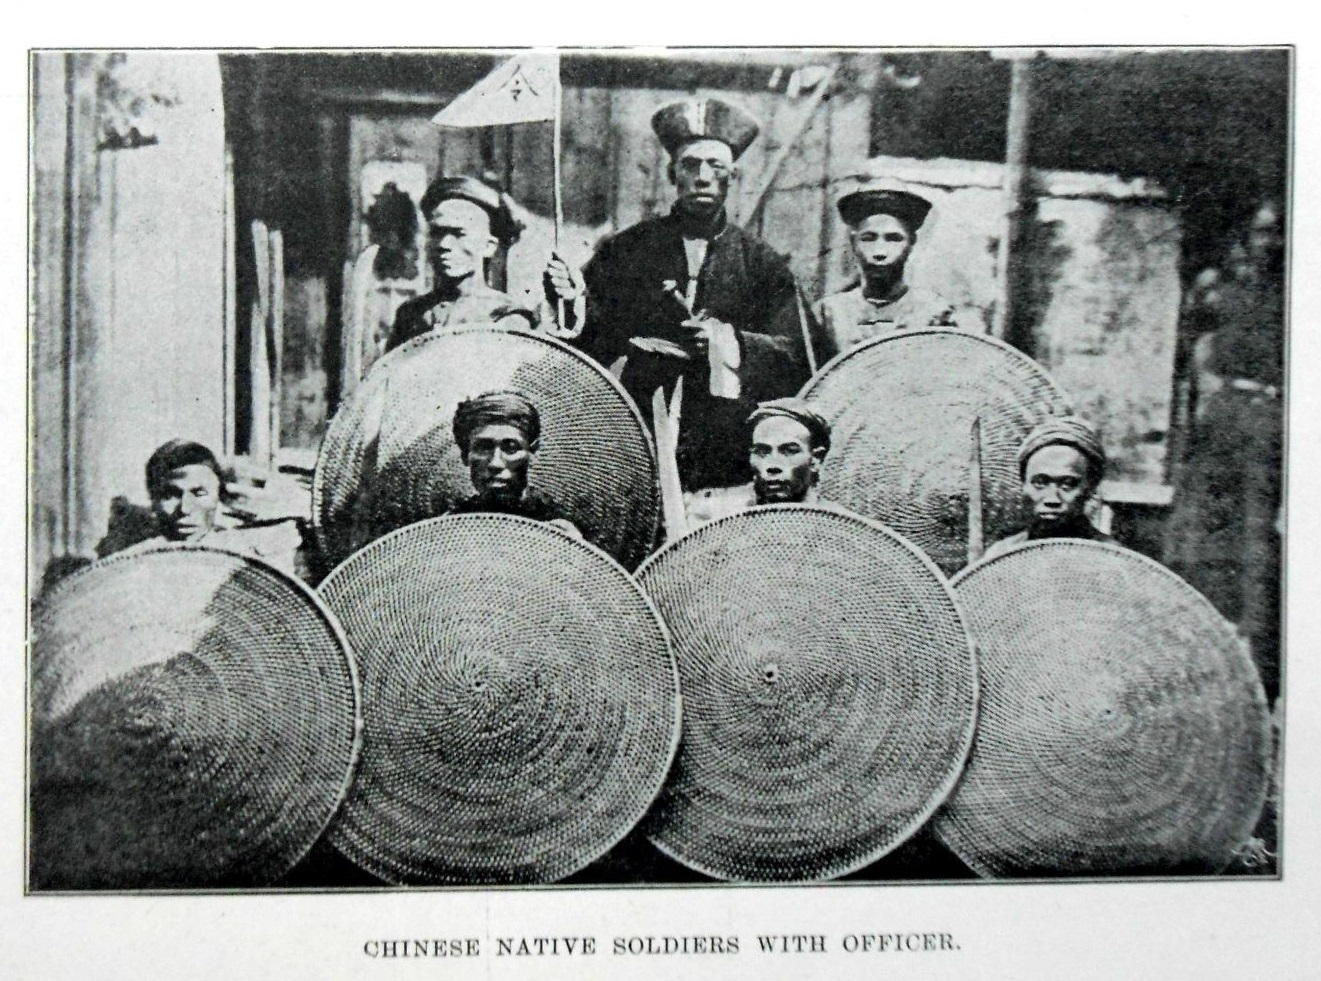 Tegpai soldiers with officer